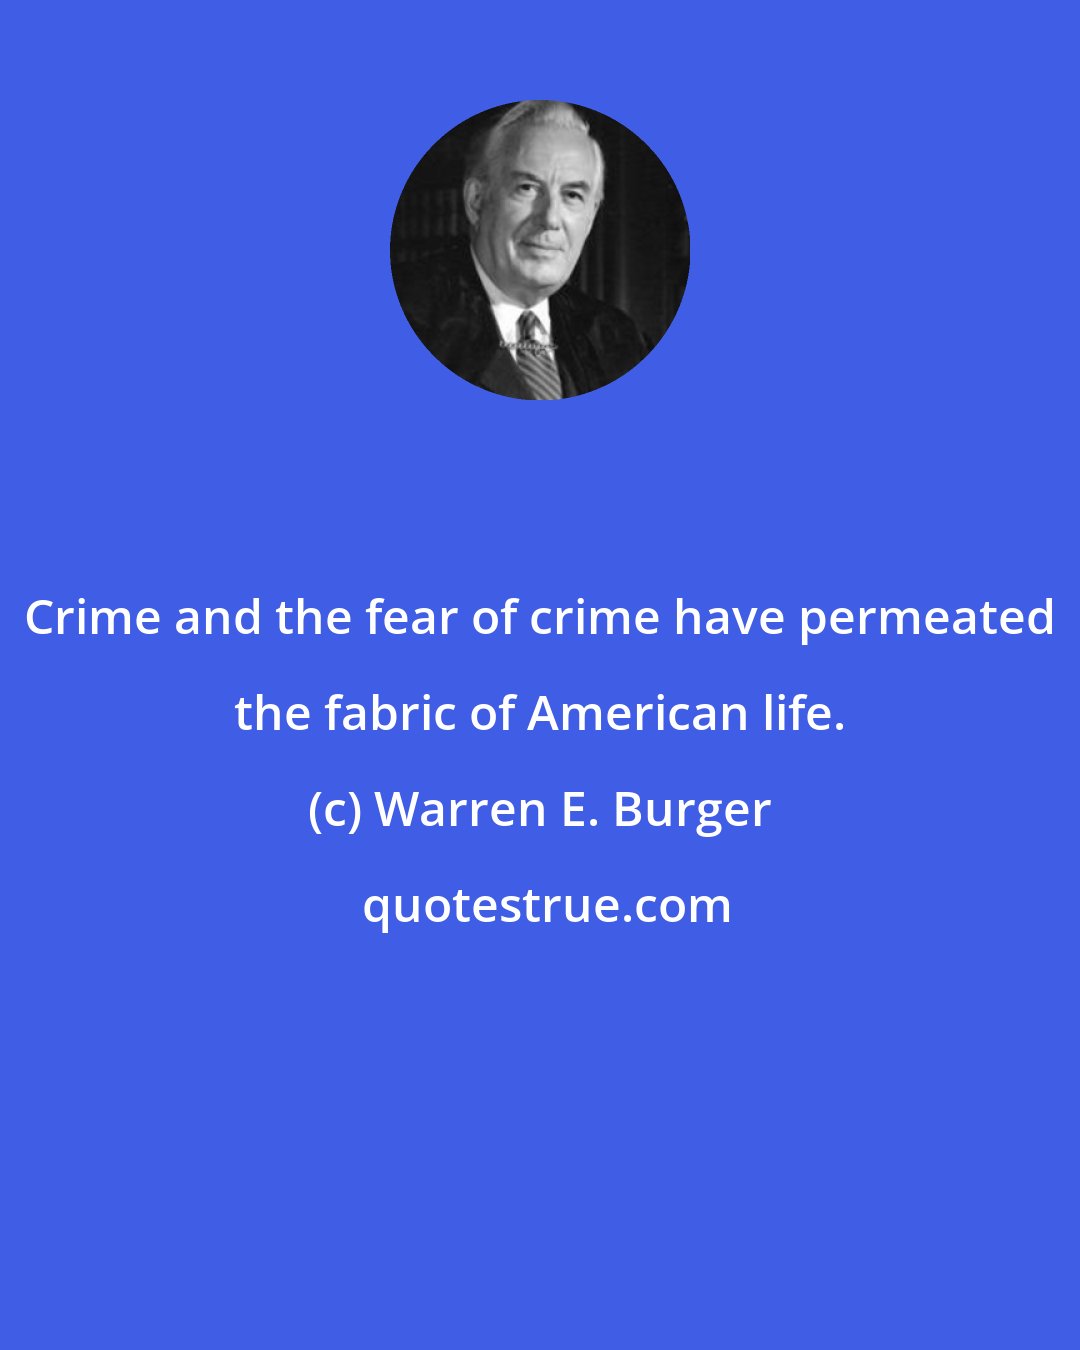 Warren E. Burger: Crime and the fear of crime have permeated the fabric of American life.